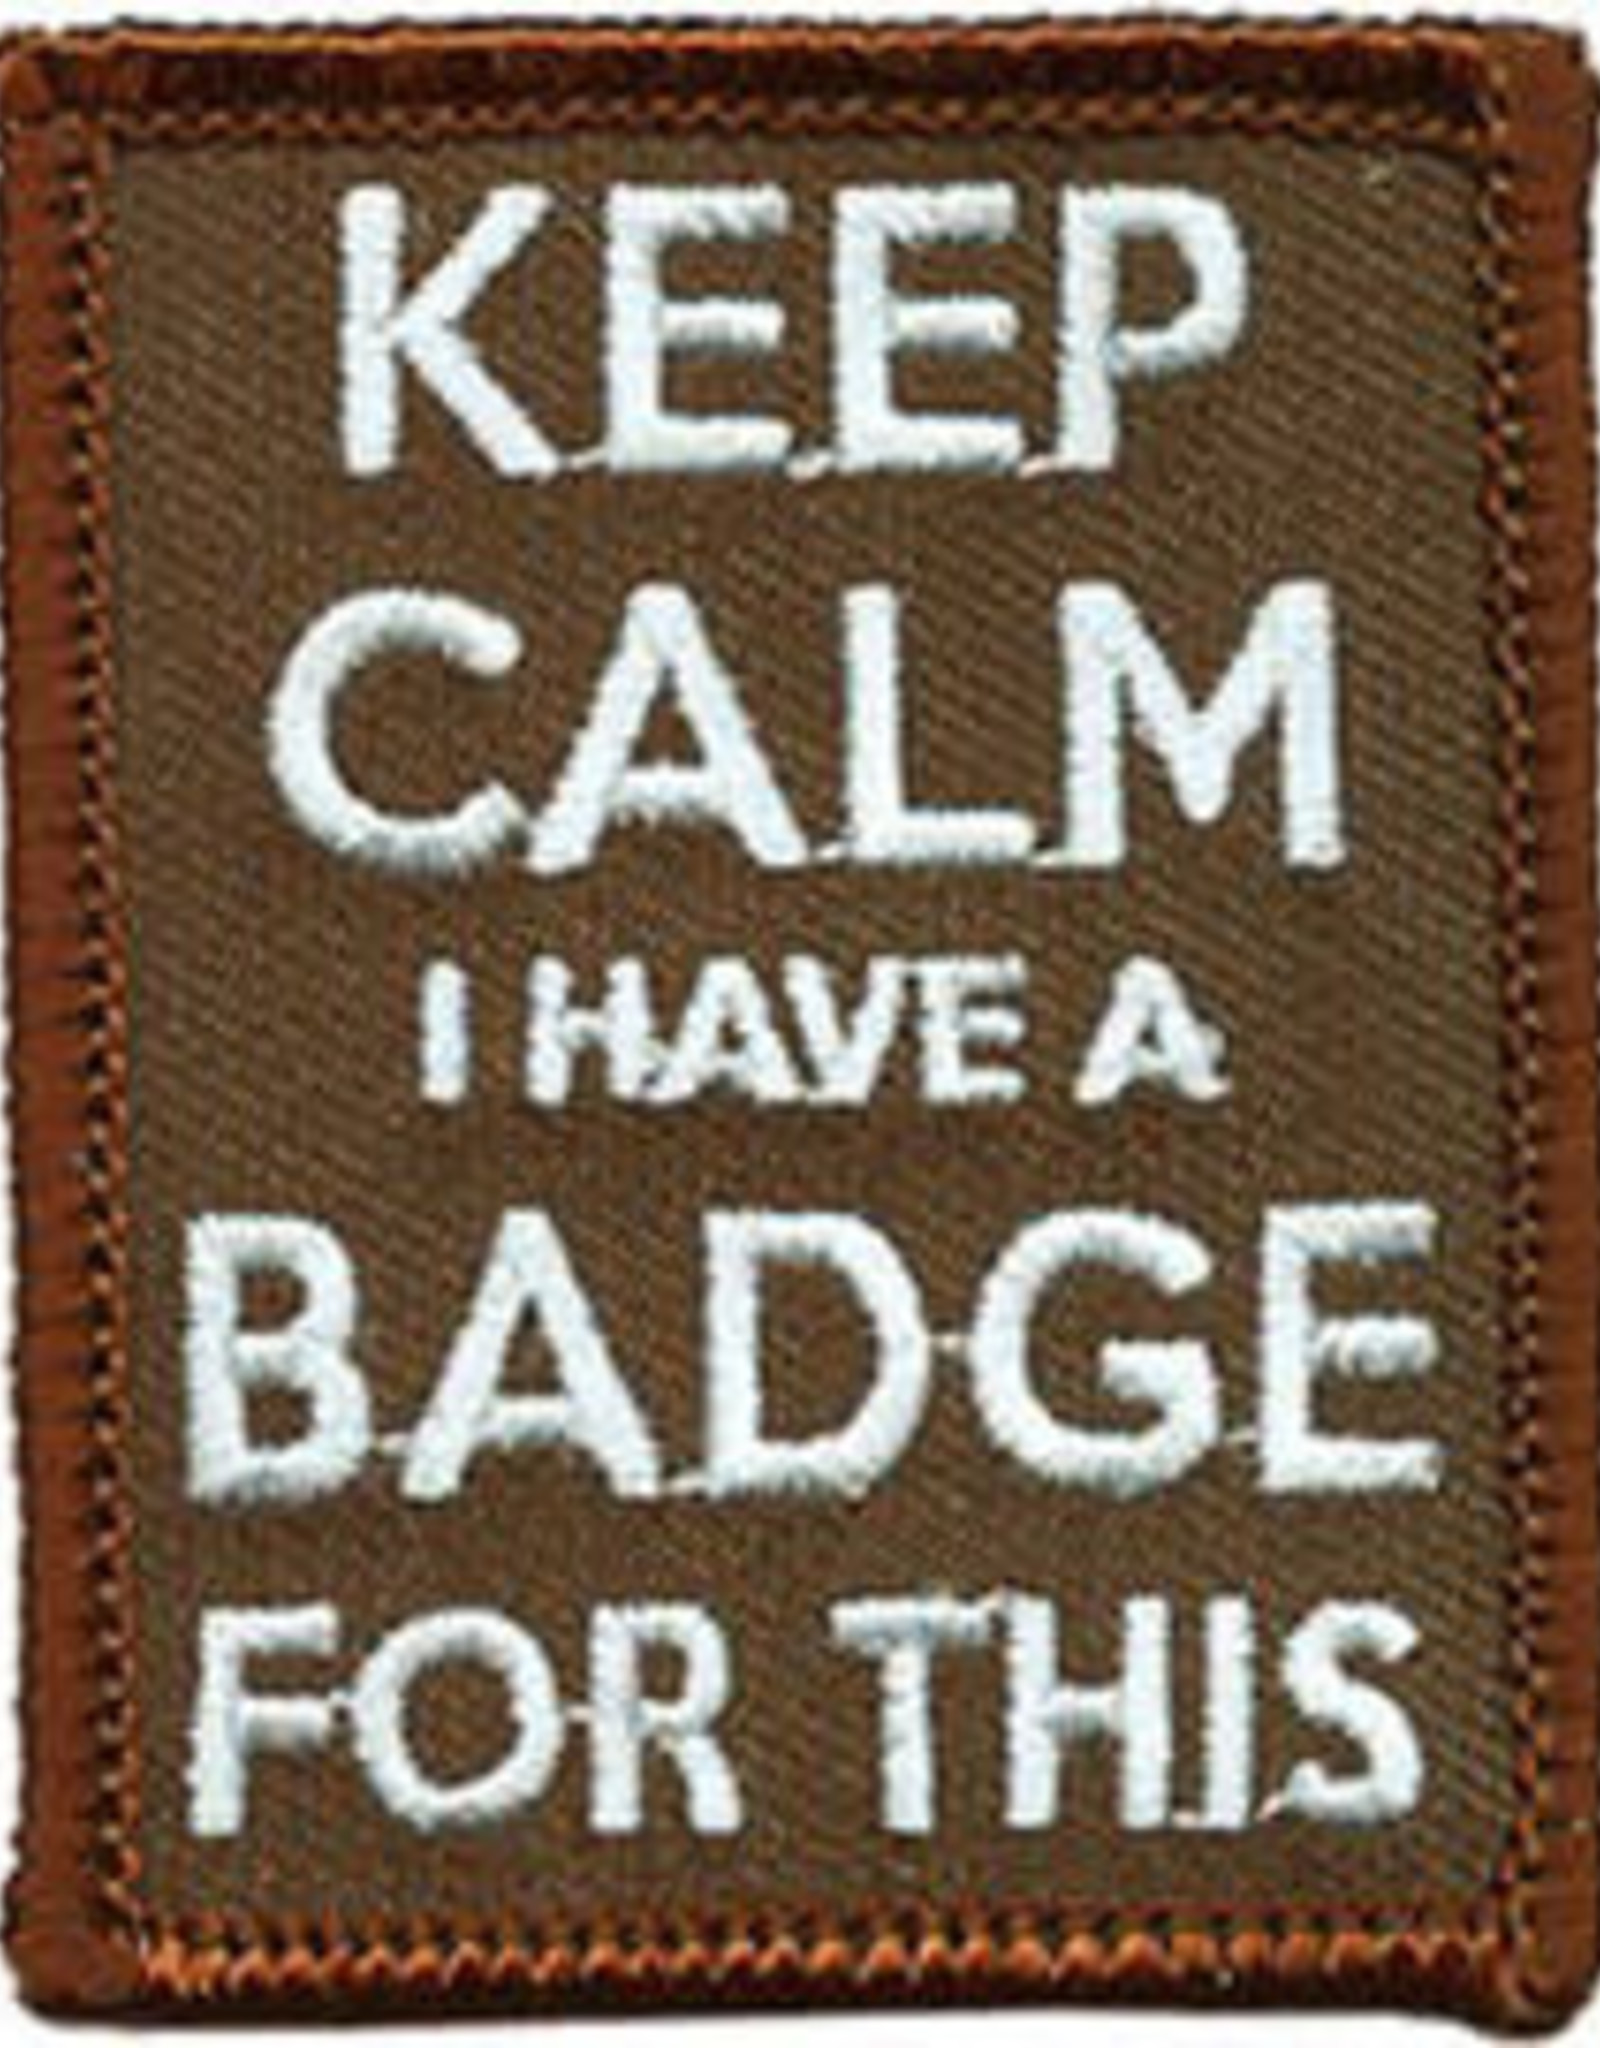 Advantage Emblem & Screen Prnt Keep Calm I Have a Badge for This Fun Patch